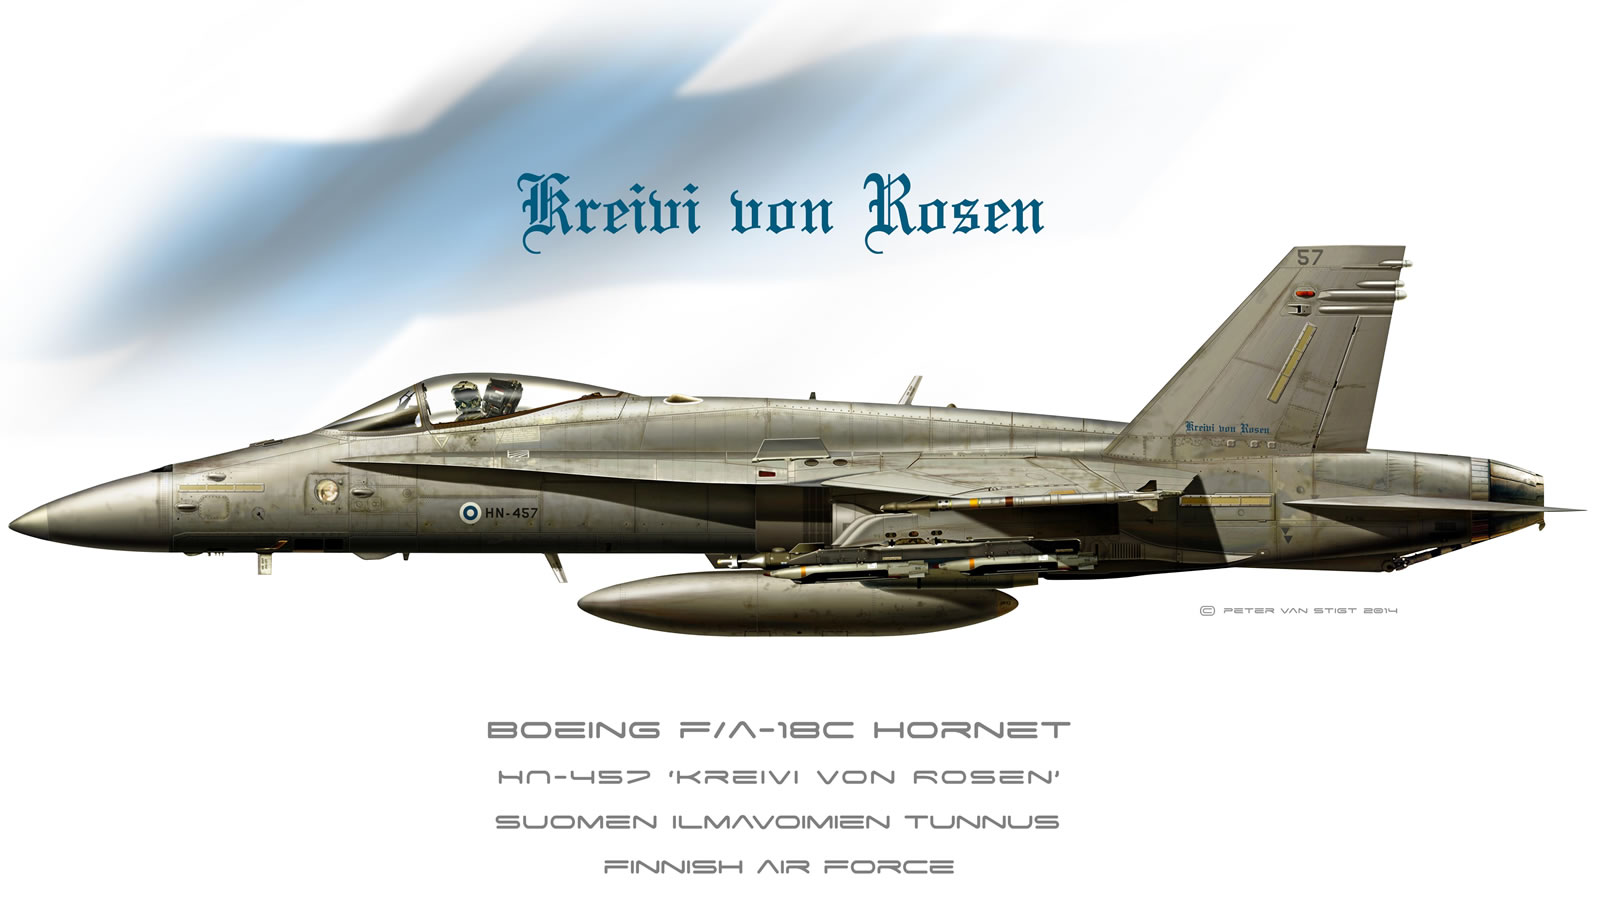 Finland Air Force Hornet Profile